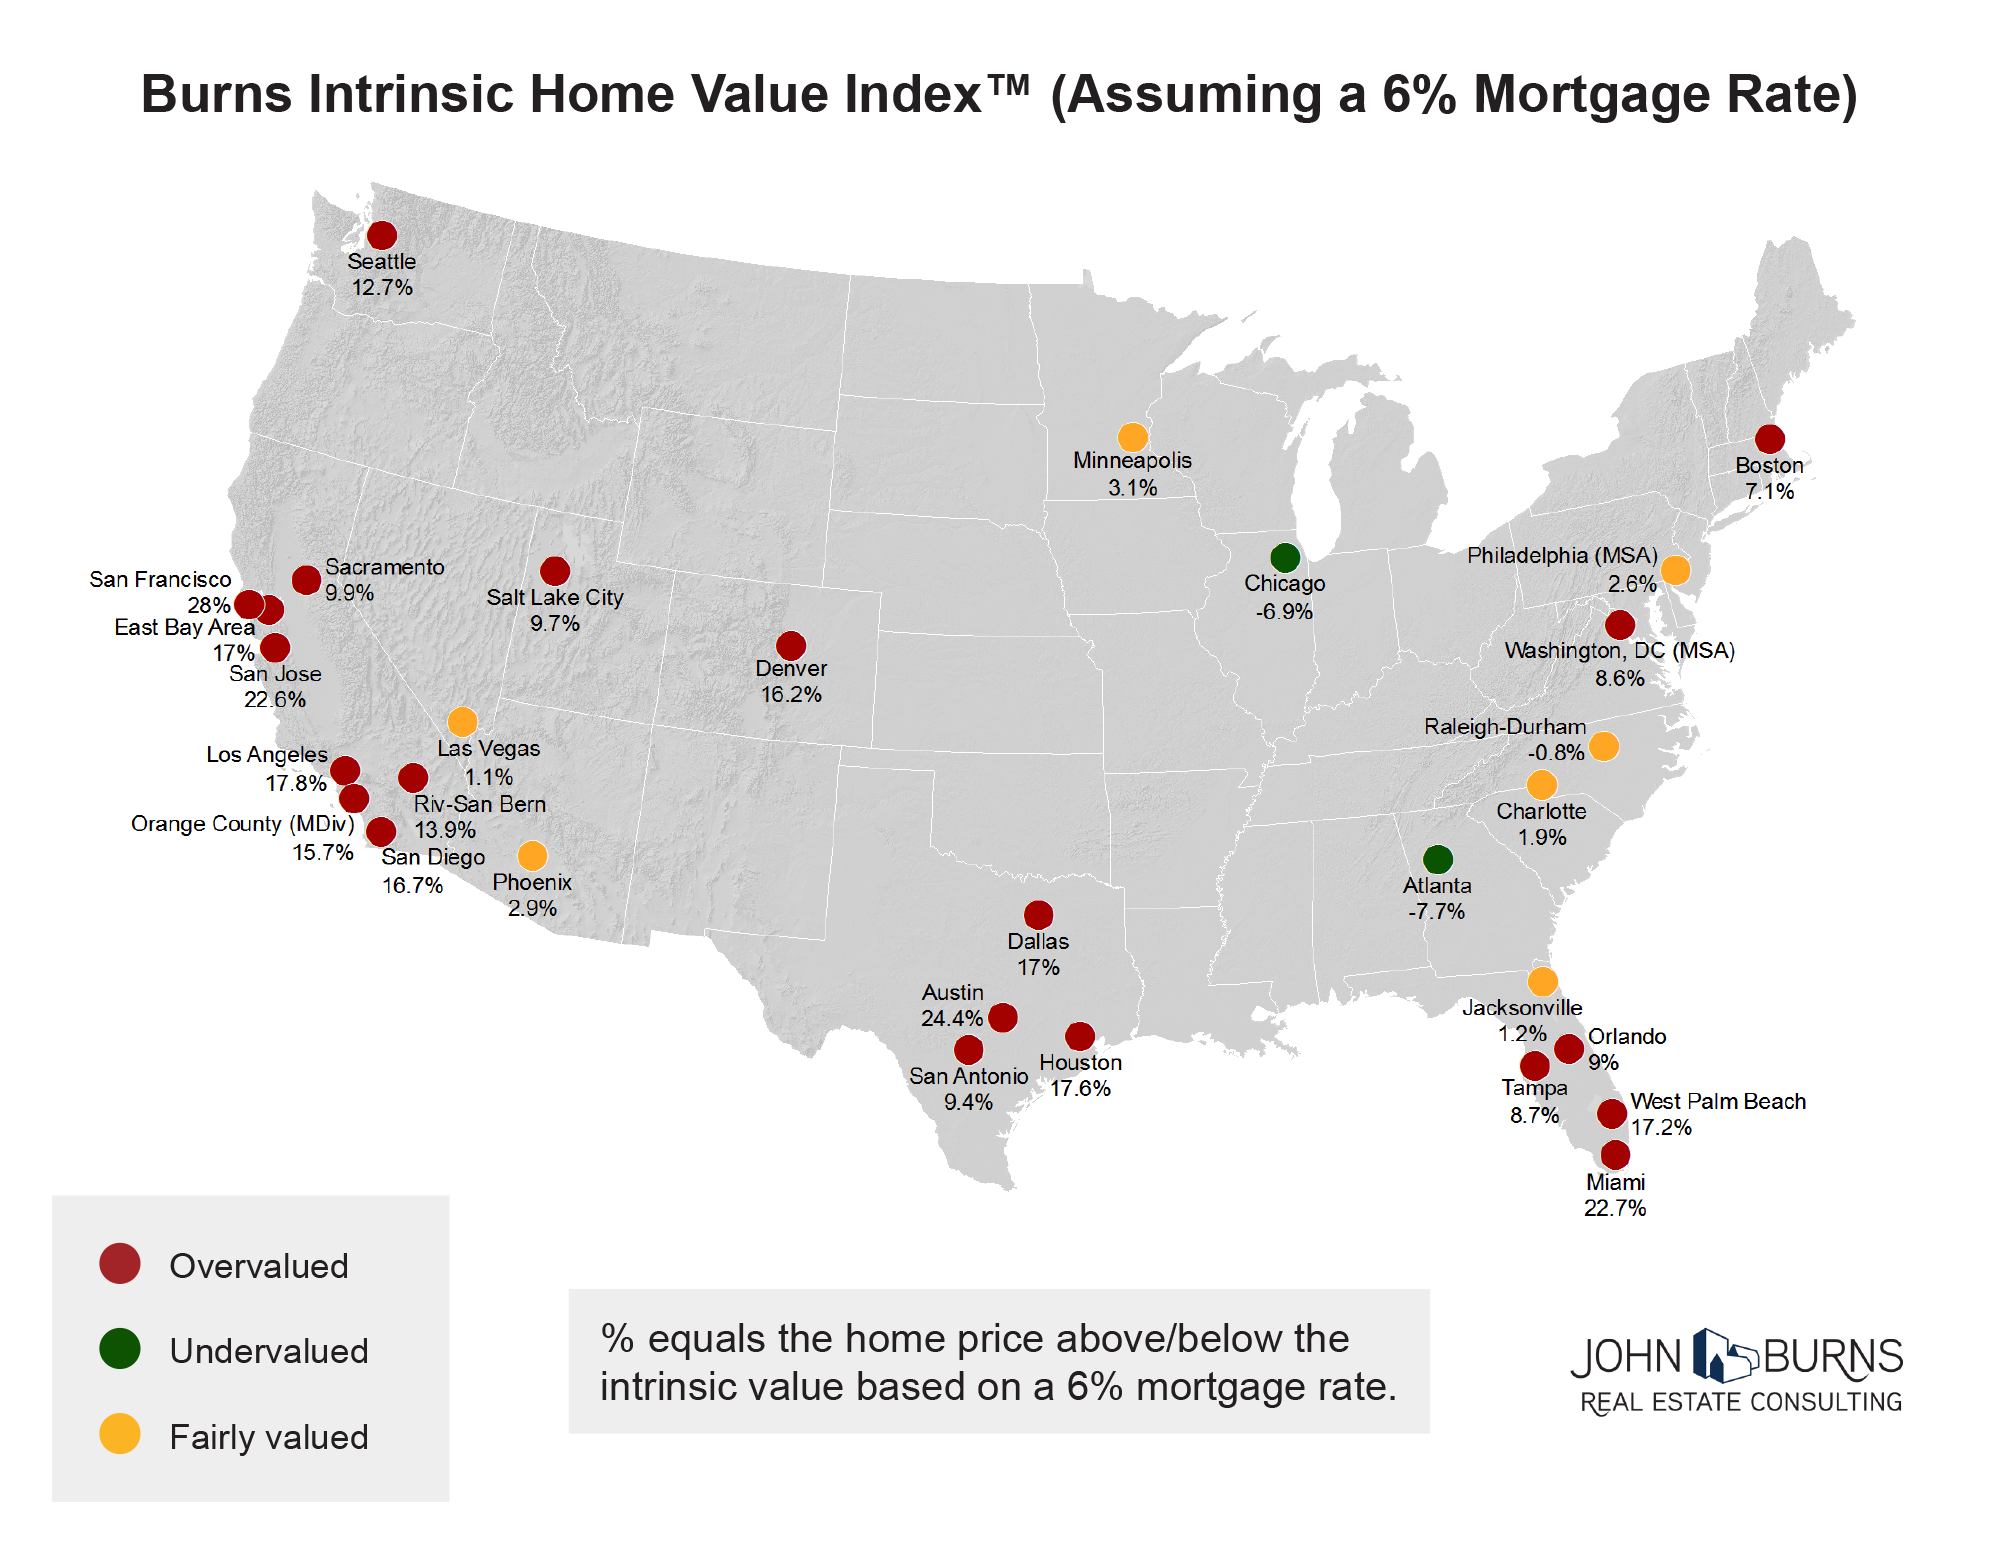 Intrinsic-Home-Values-Map-Sept2015.png